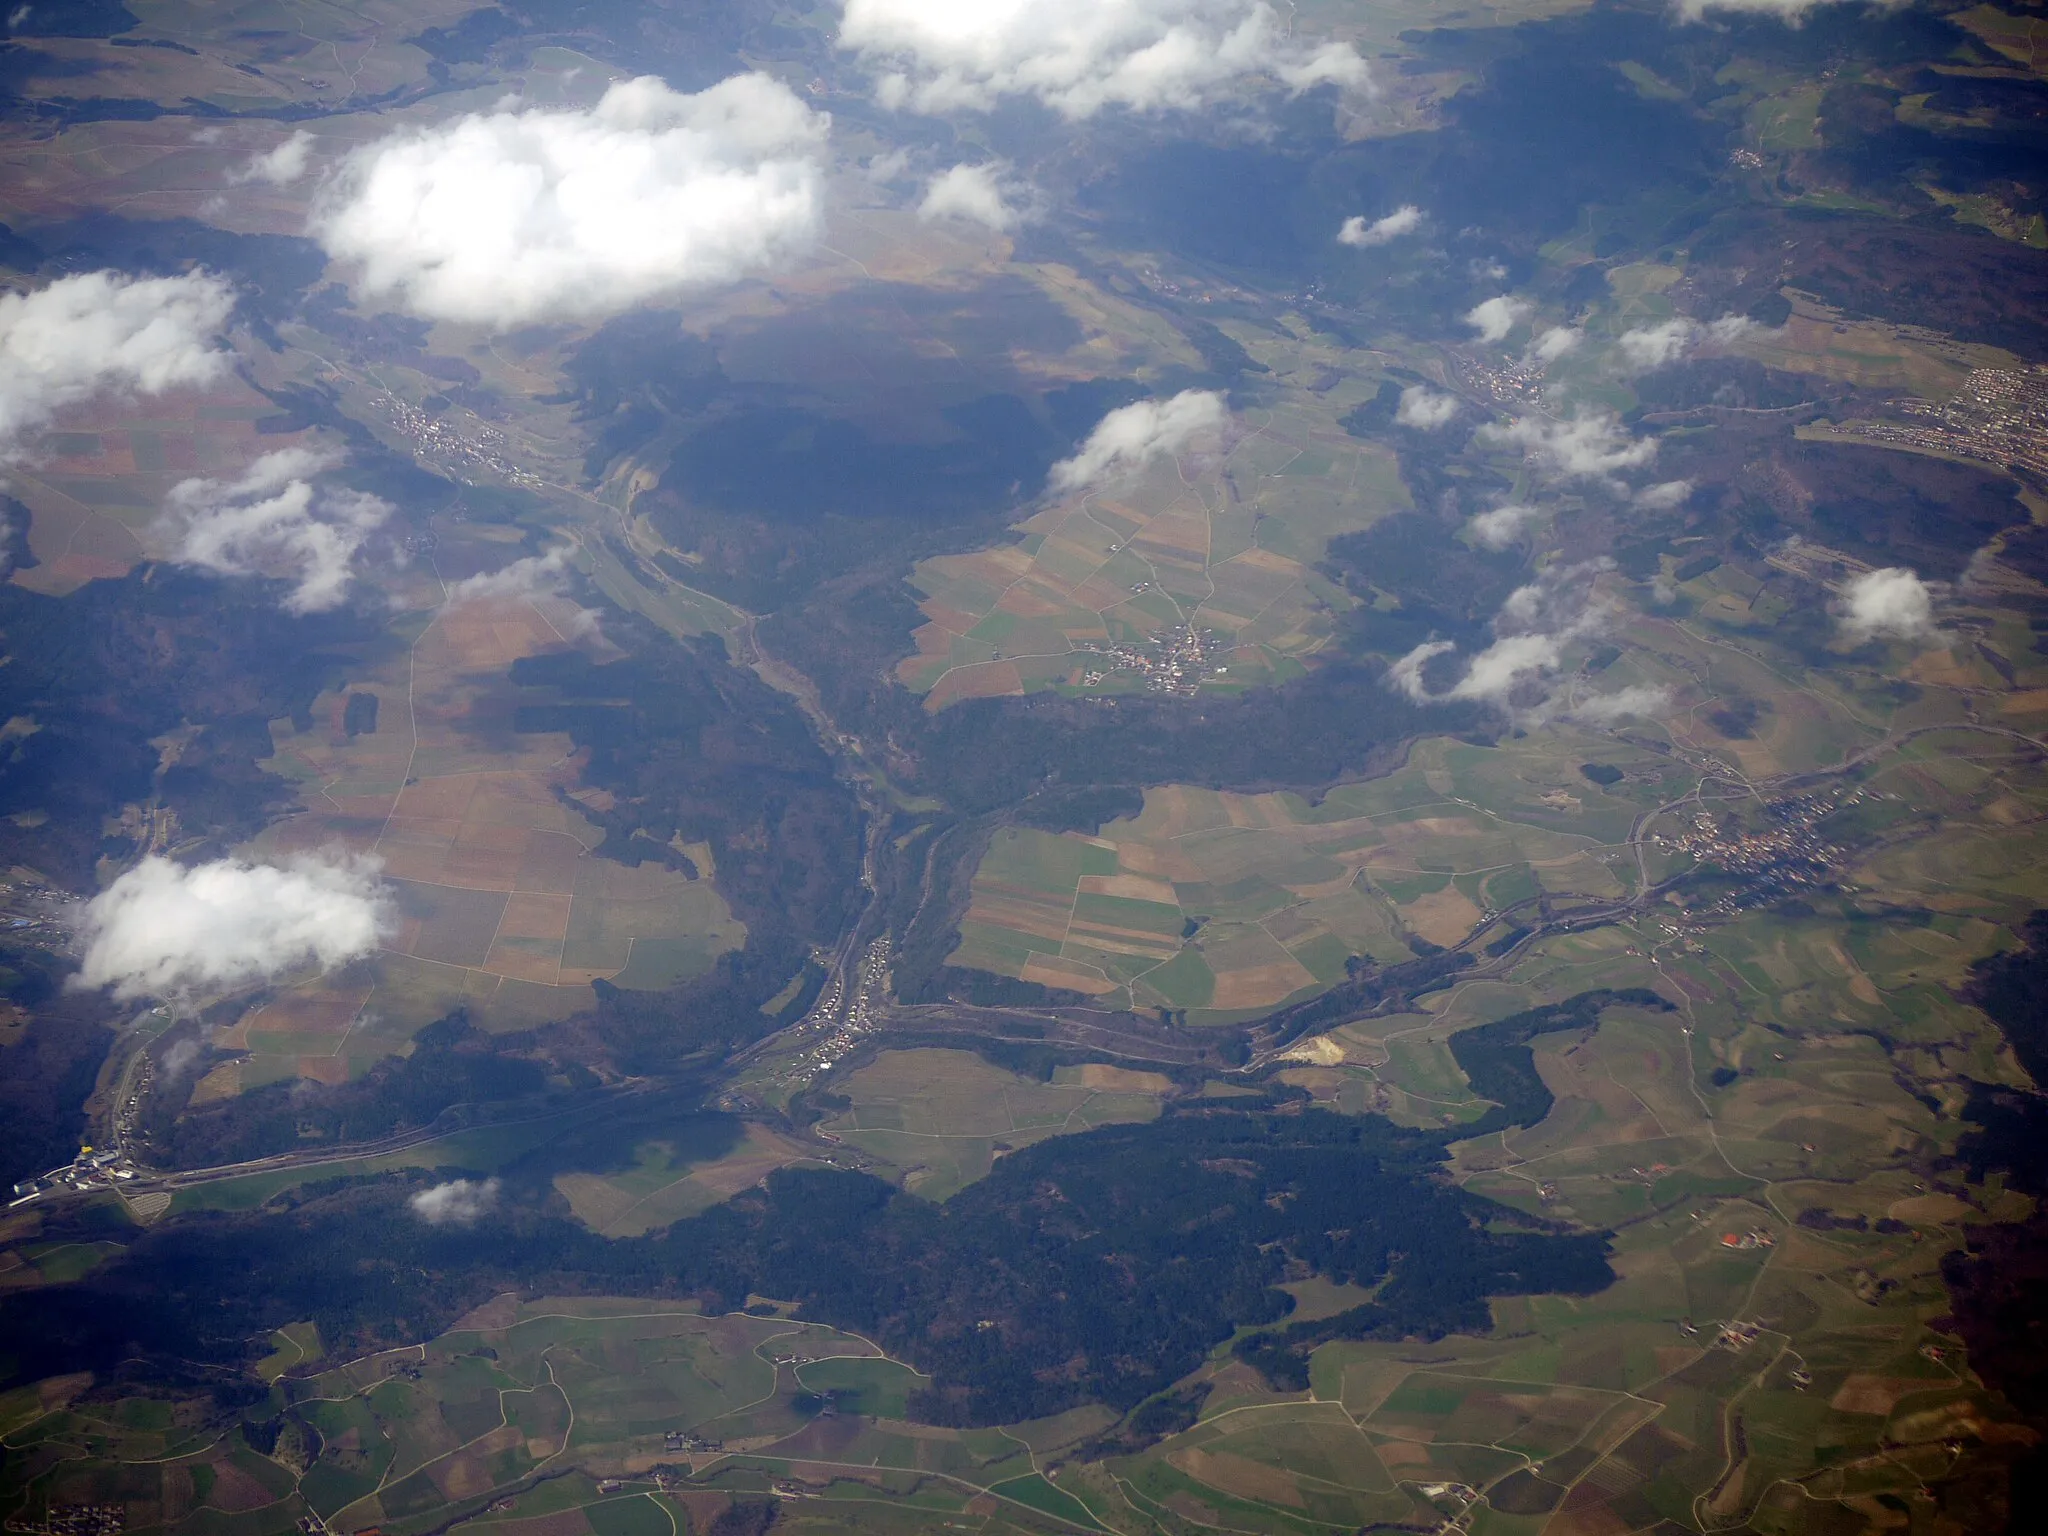 Photo showing: Grimmelshofen - Blumegg, photograph taken from the sky, on the fly line between Marseille and Stockholm.